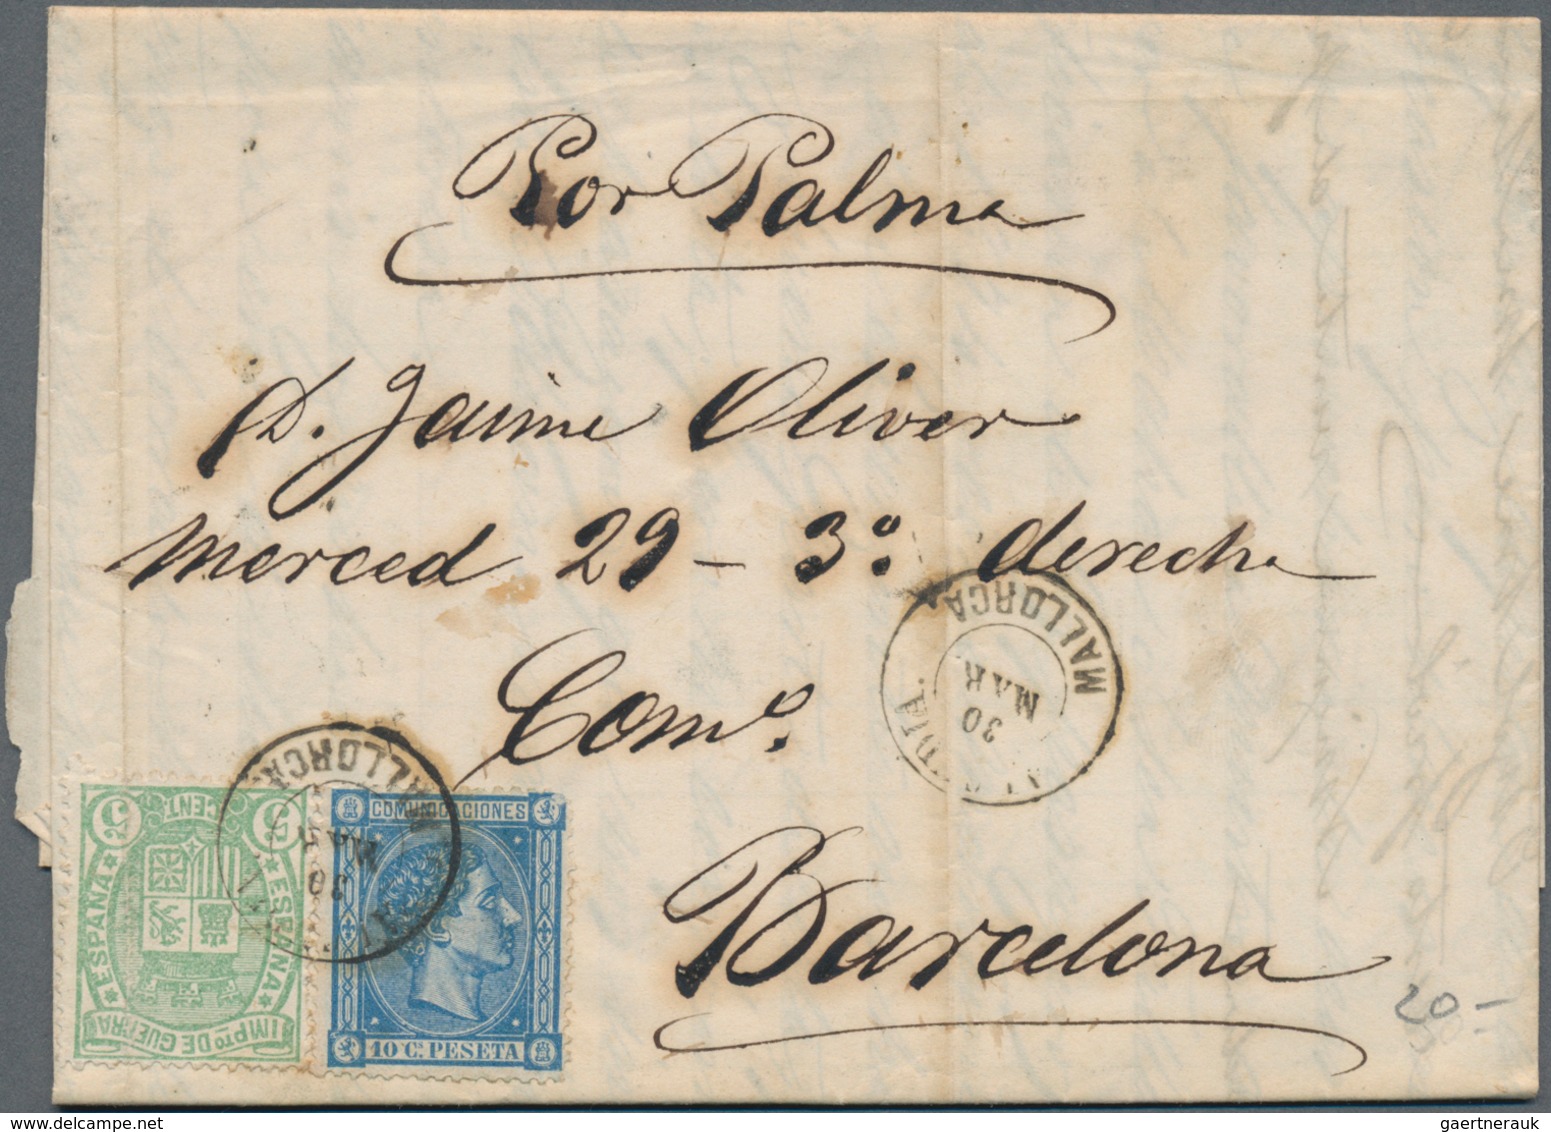 Spanien: 1846/82, mostly folded letters (appr. 210) almost exclusively used inland inc. prephilateli